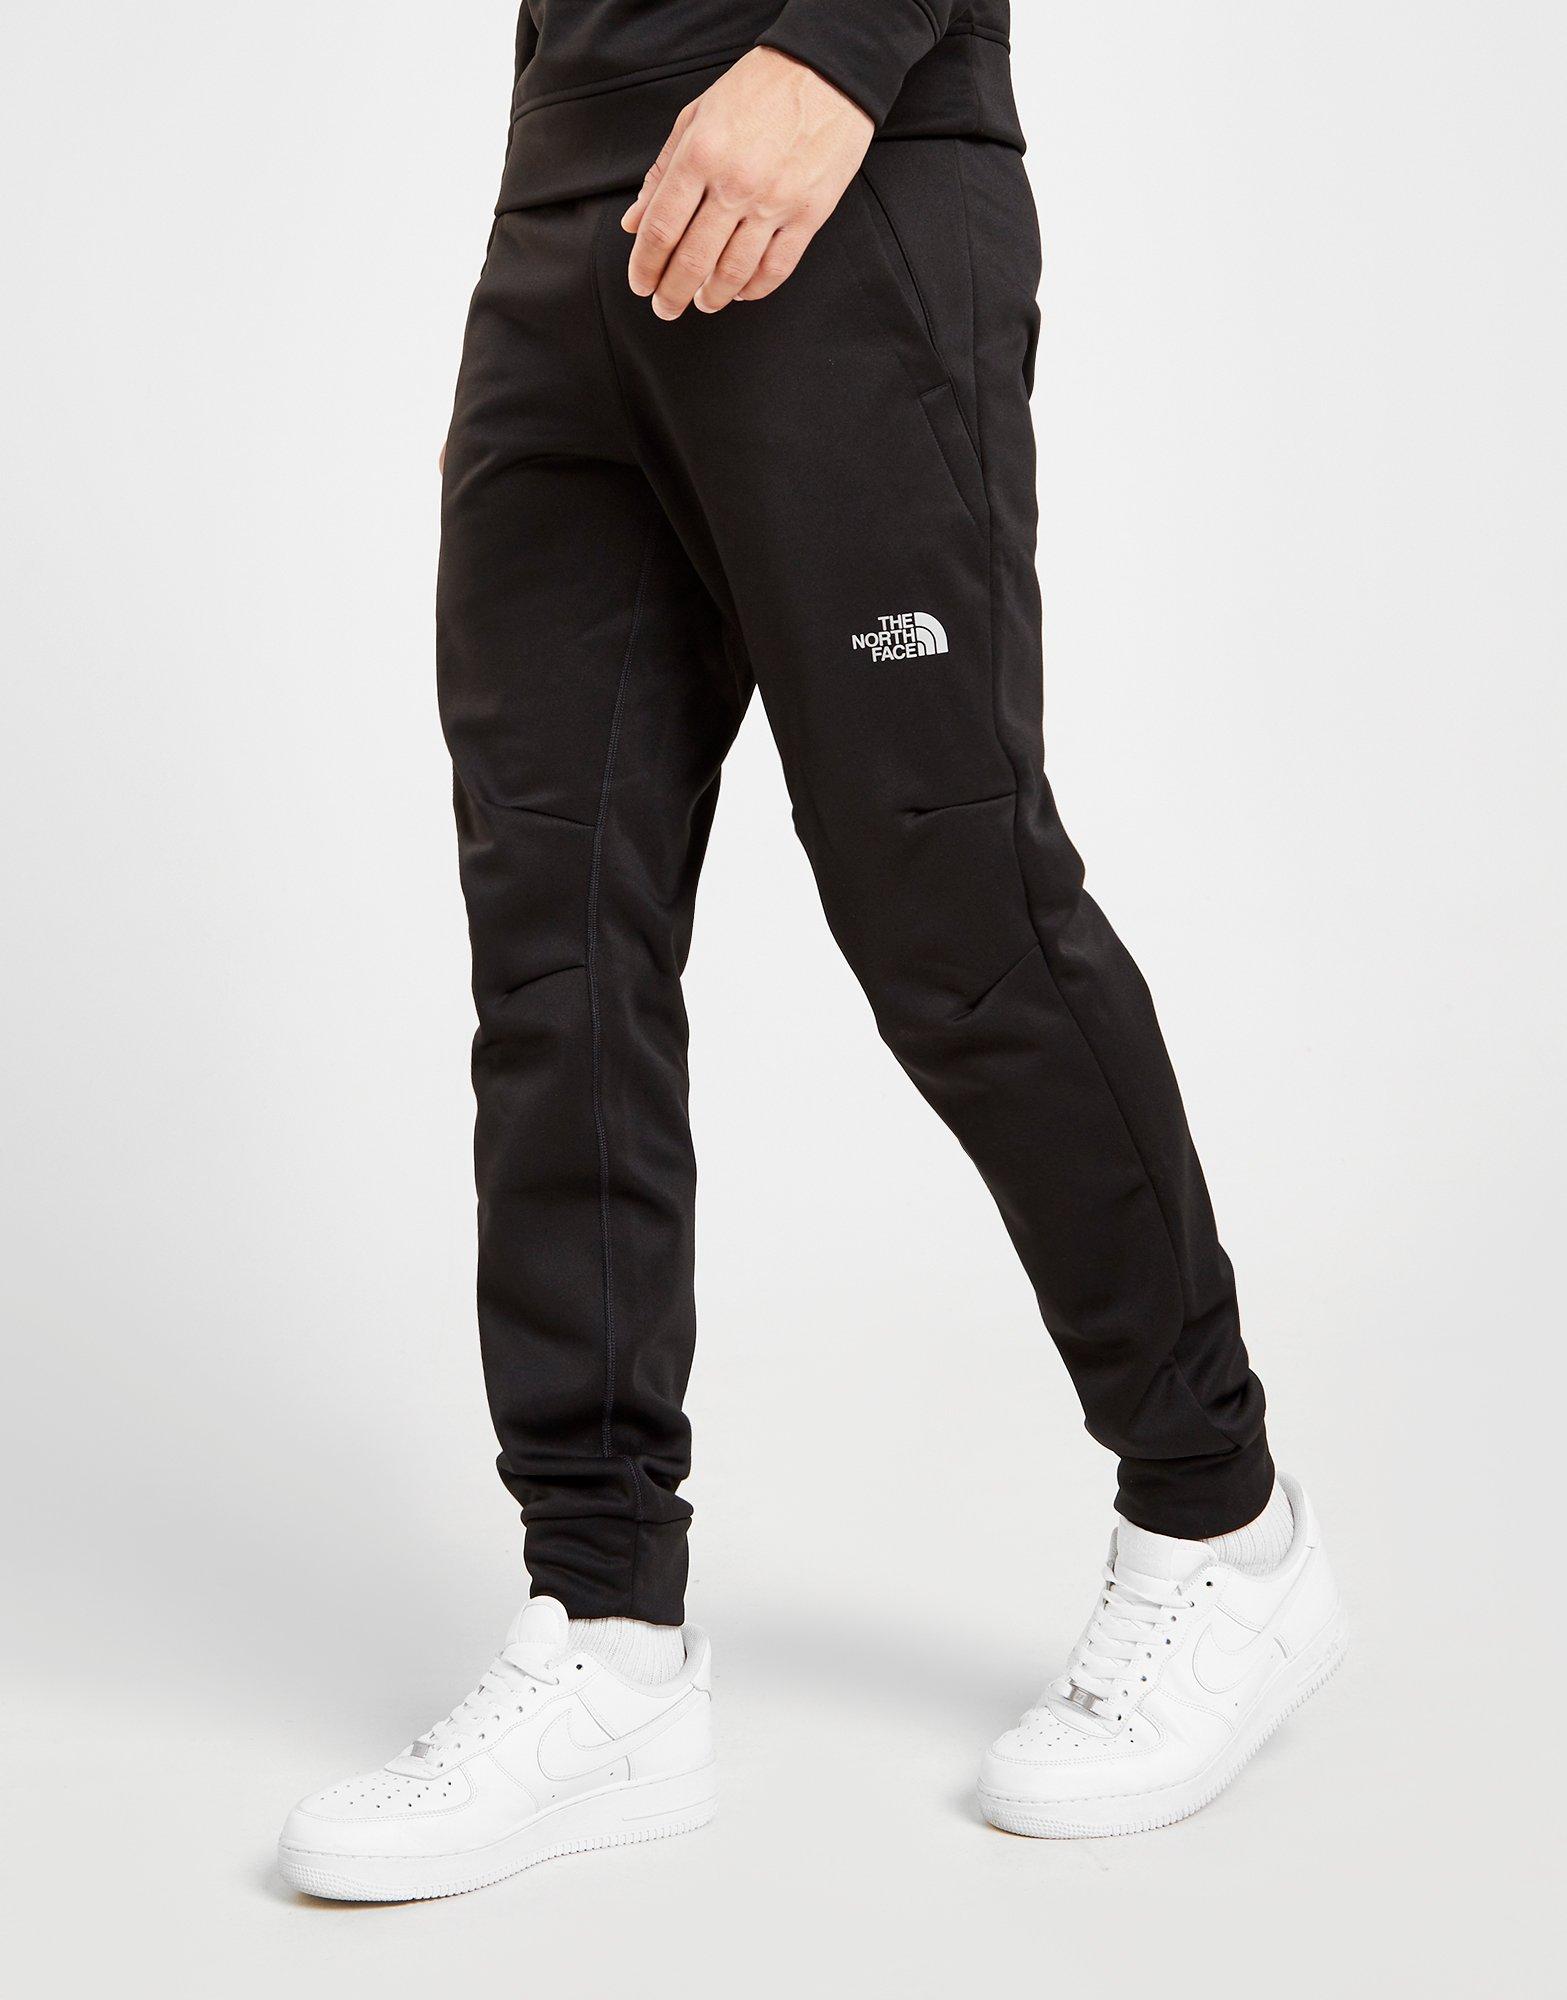 north face track pants 